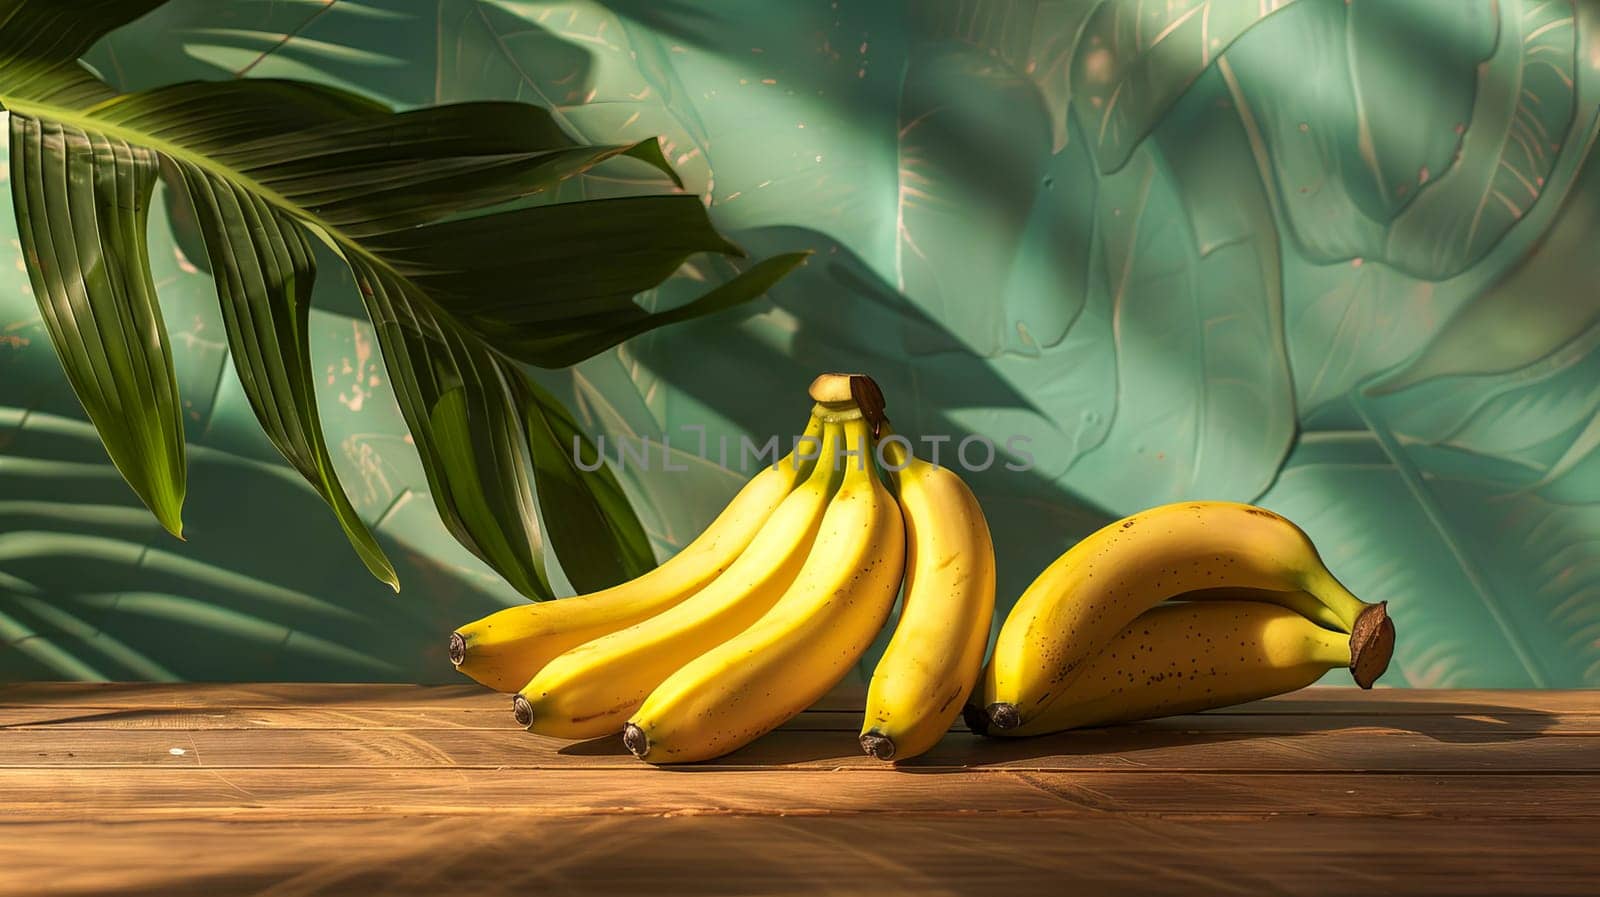 Ripe bananas on a wooden surface, tropical background. by OlgaGubskaya